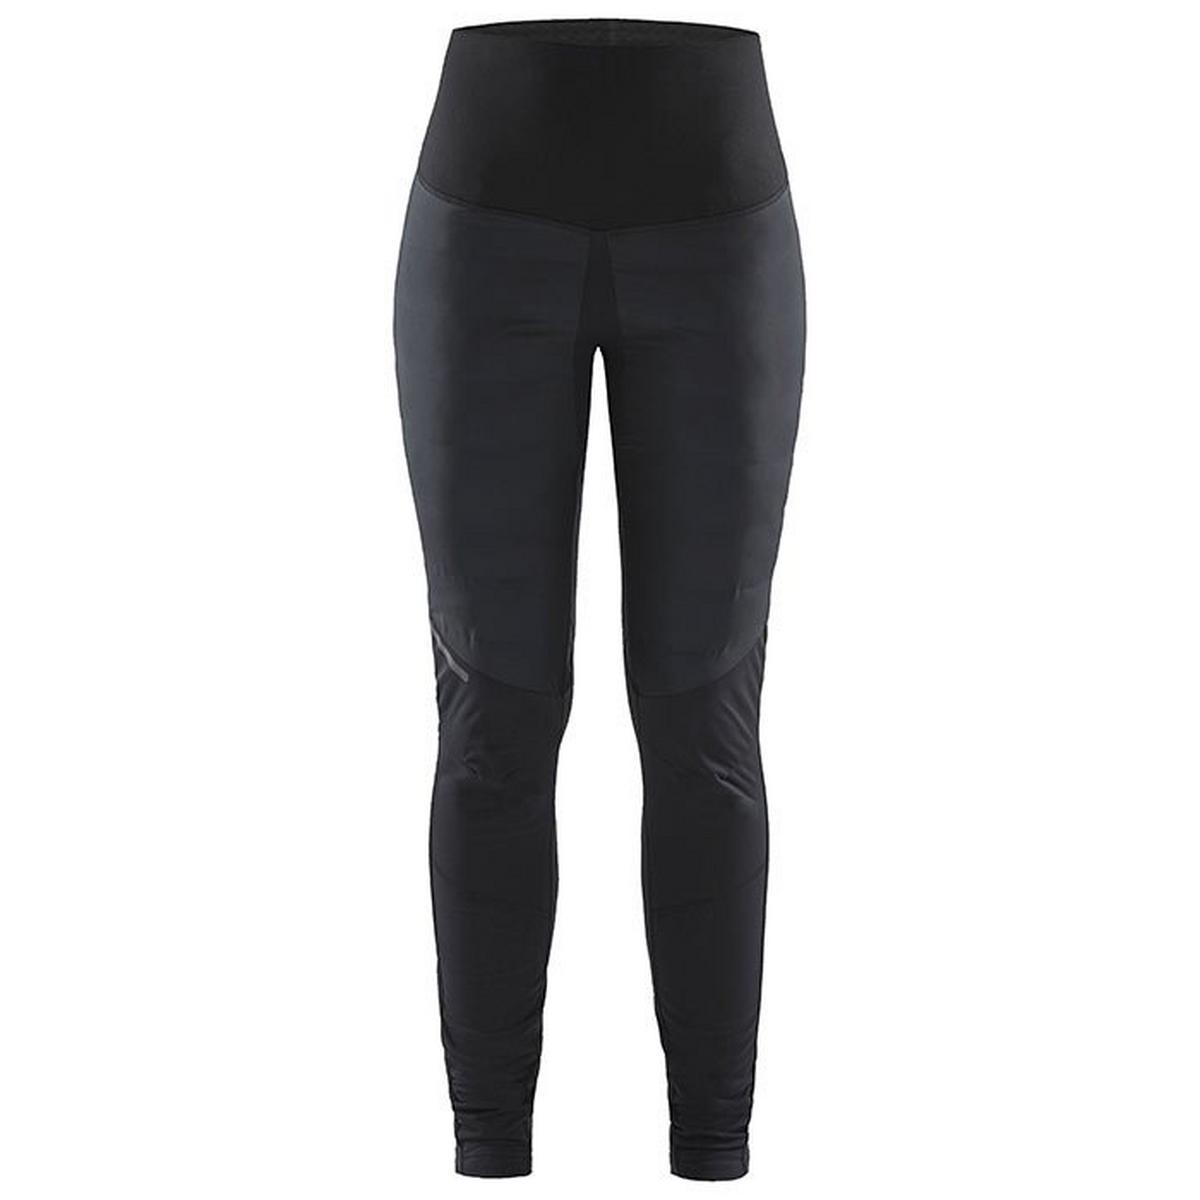 Women's Pursuit Thermal Tight